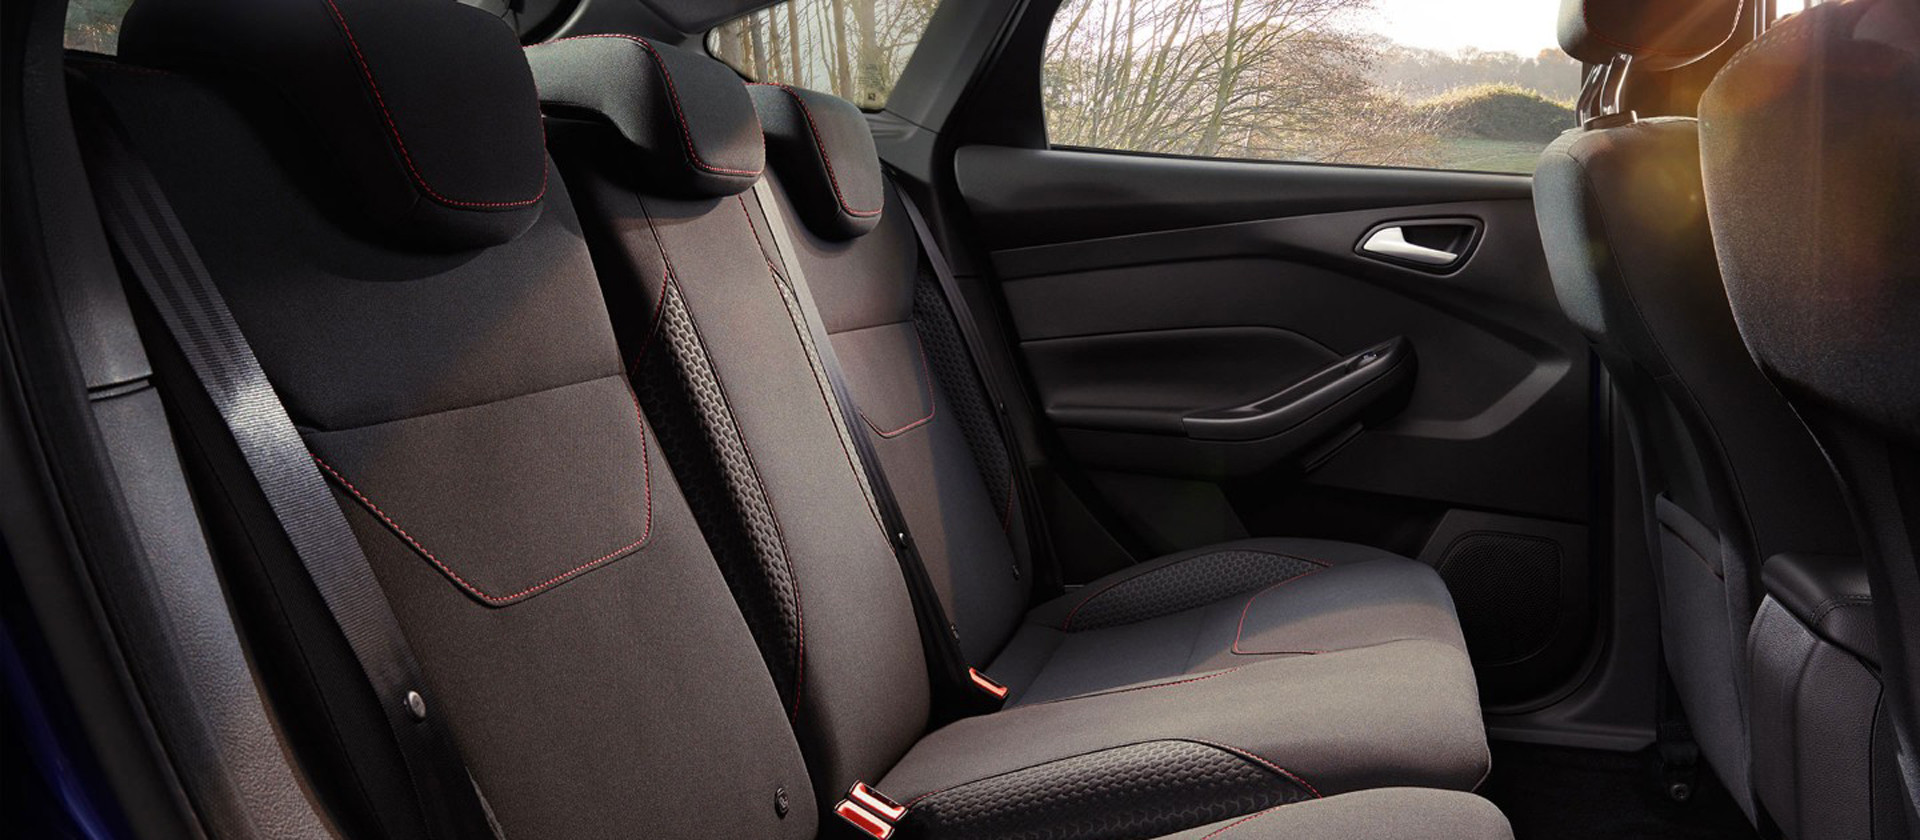 ford-focus_st_line-eu-focus_rear_seating_rt3-16x9-2160x1215jpgrenditions